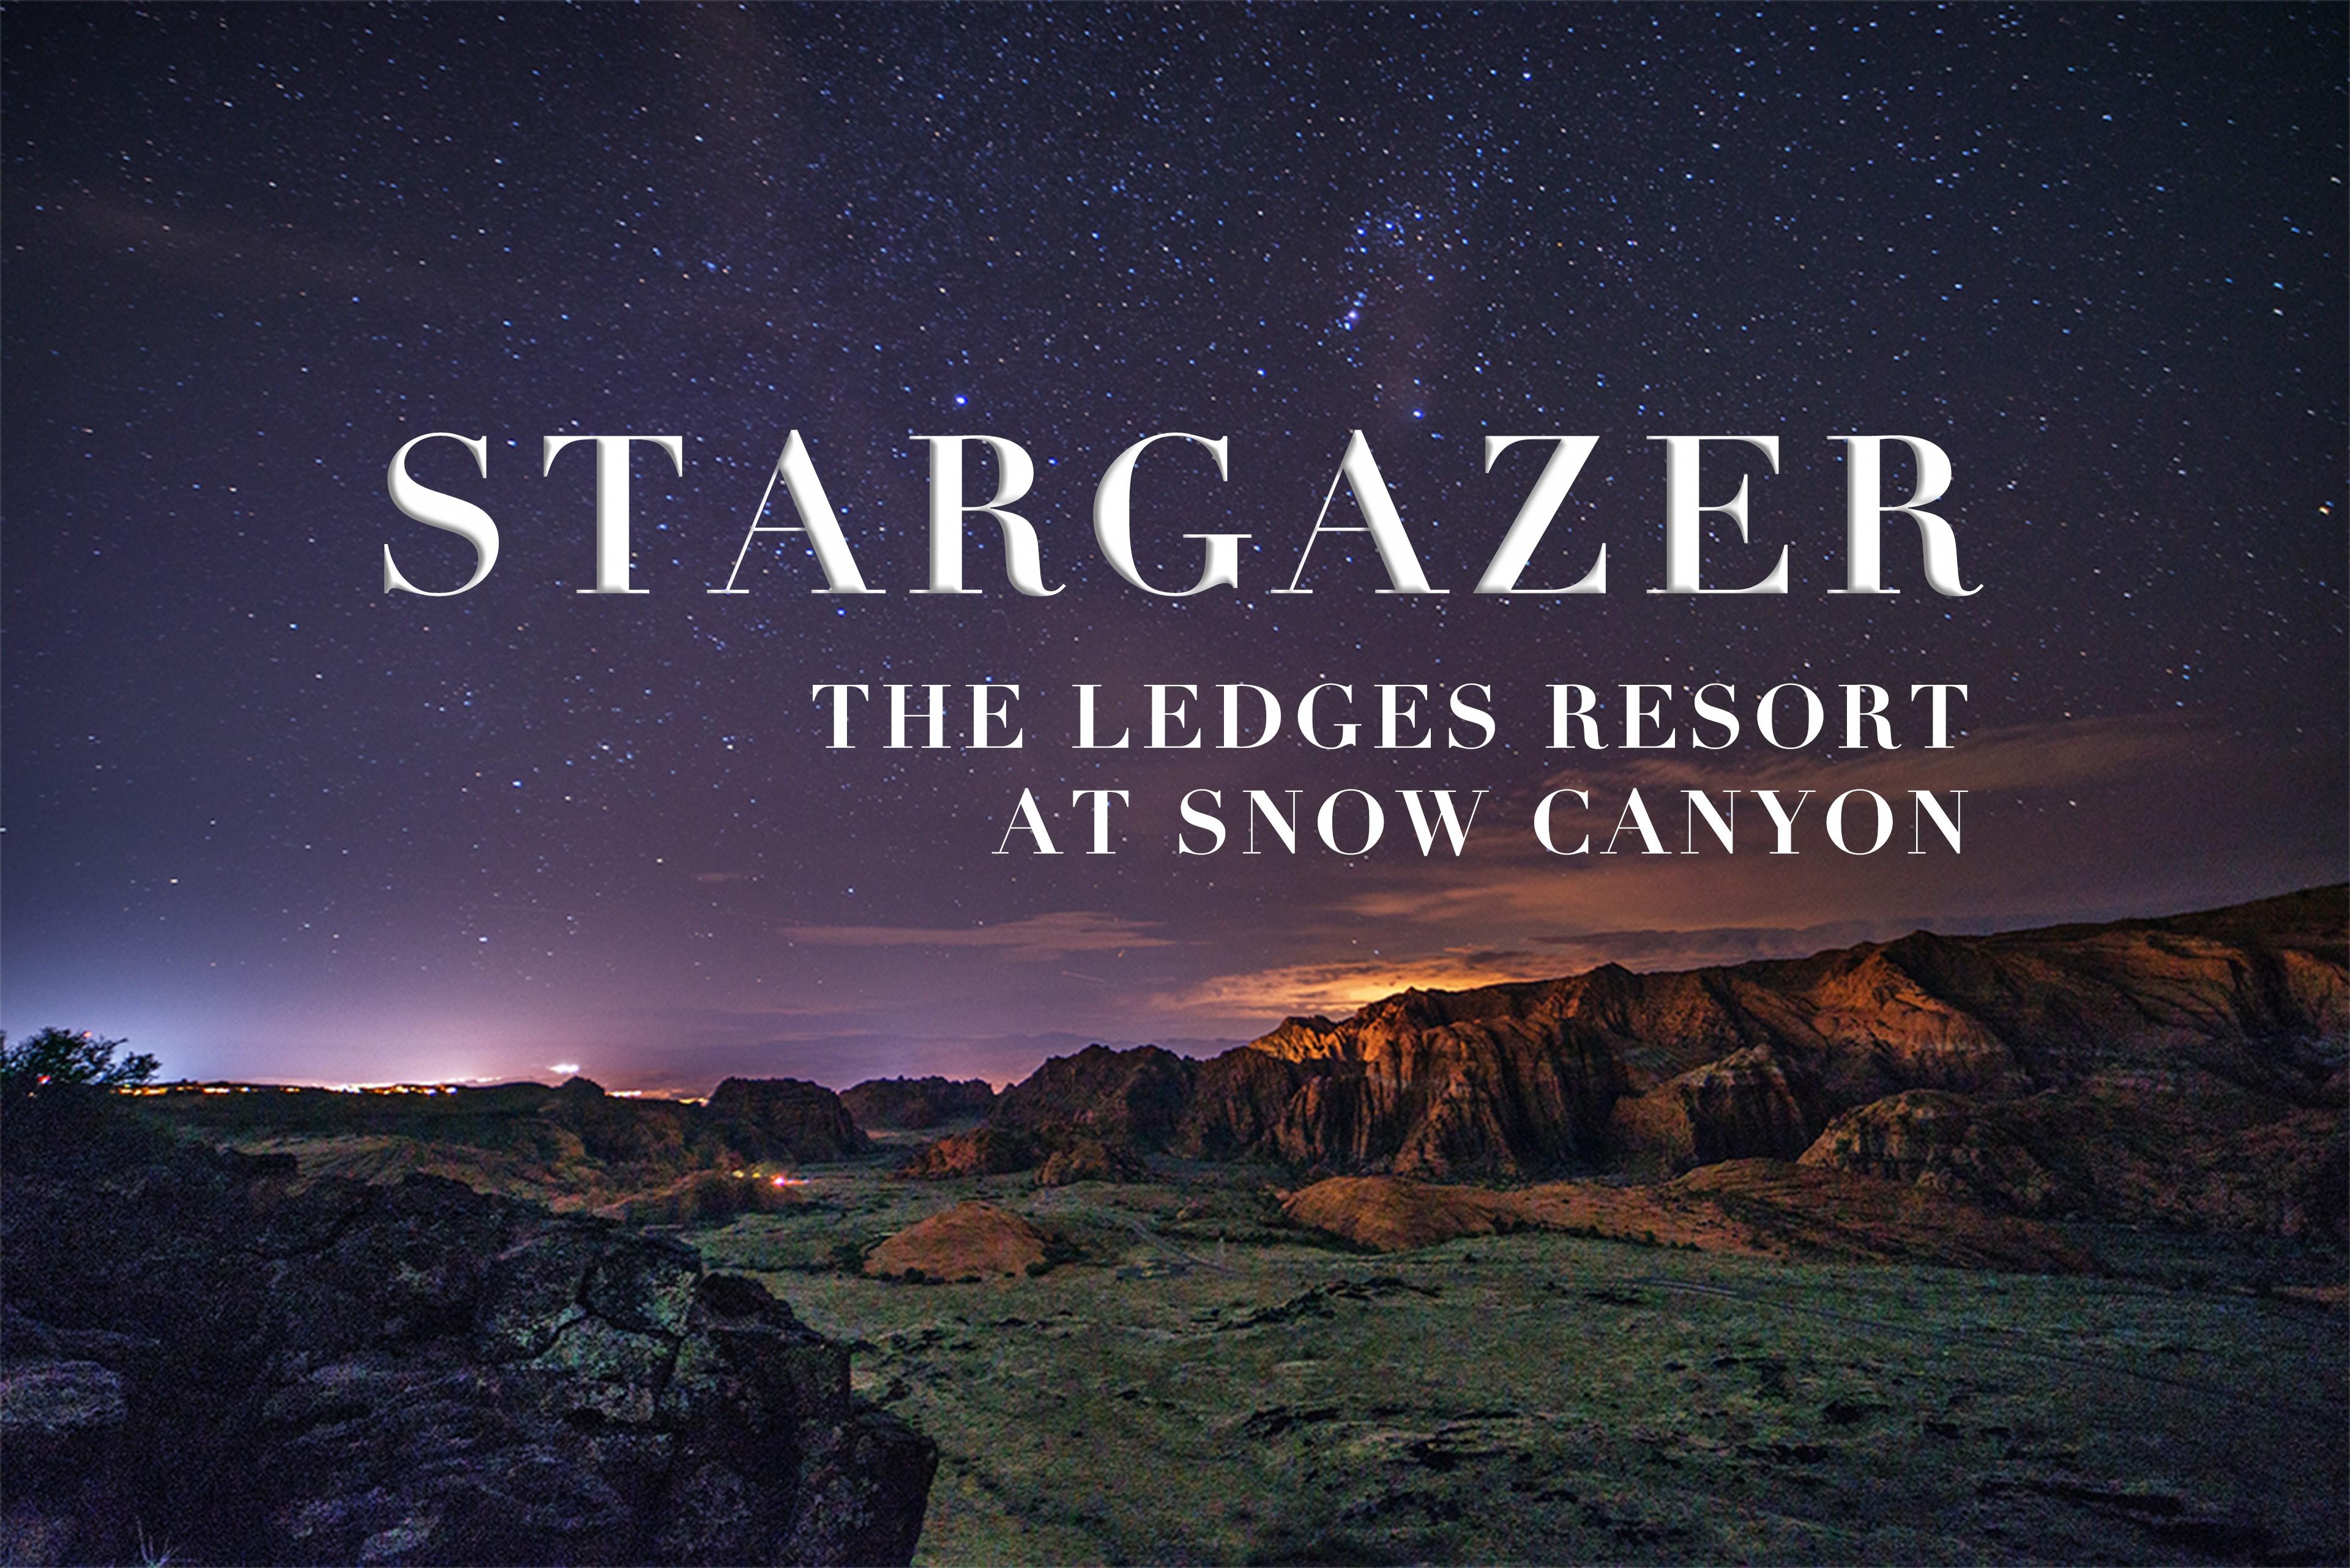 We hope you enjoy the beautiful night skies and scenic landscapes while staying at our stunning home.